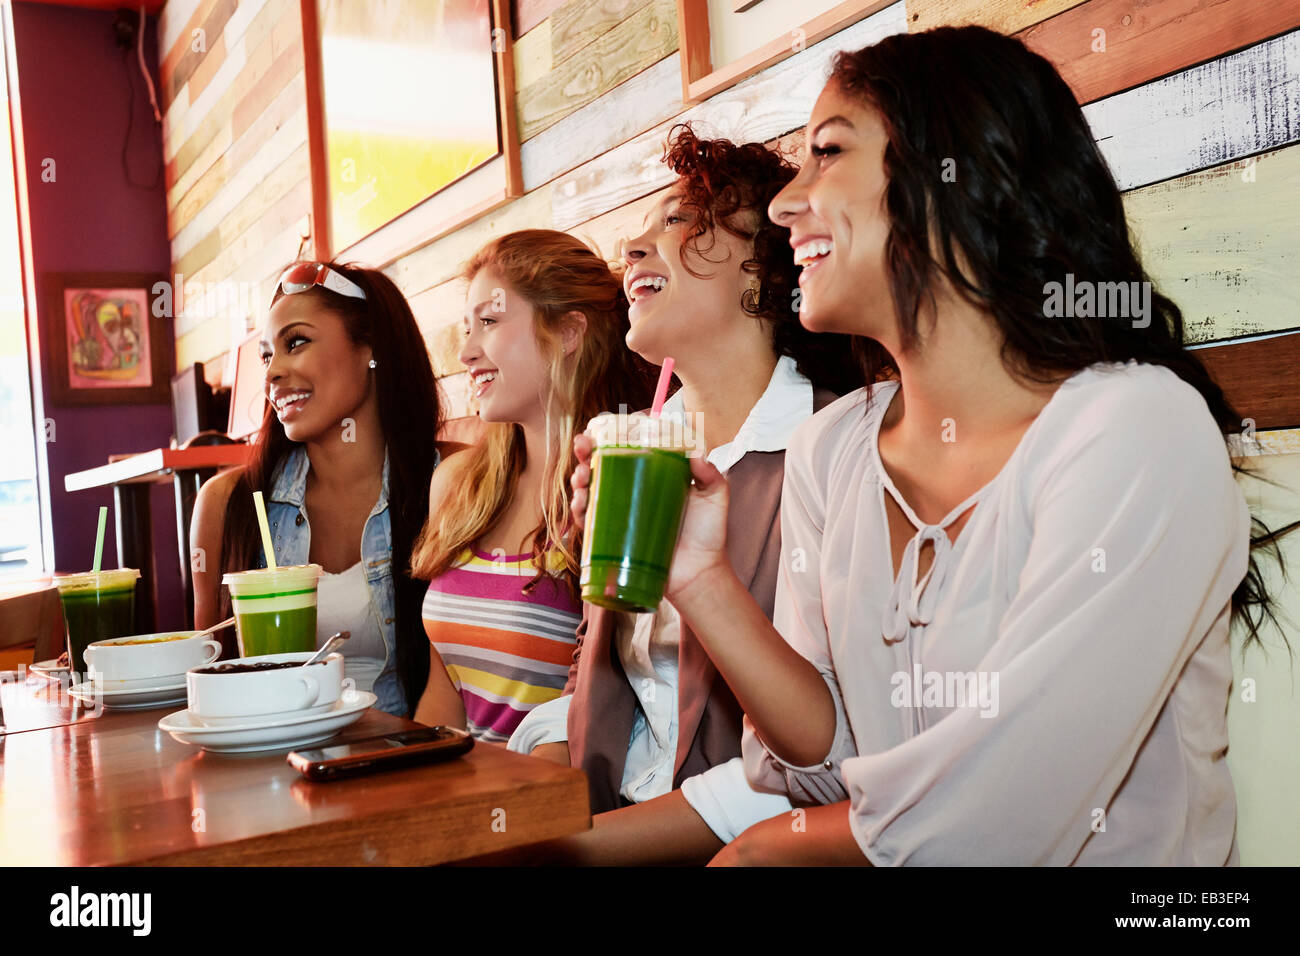 Women relaxing together in cafe Stock Photo